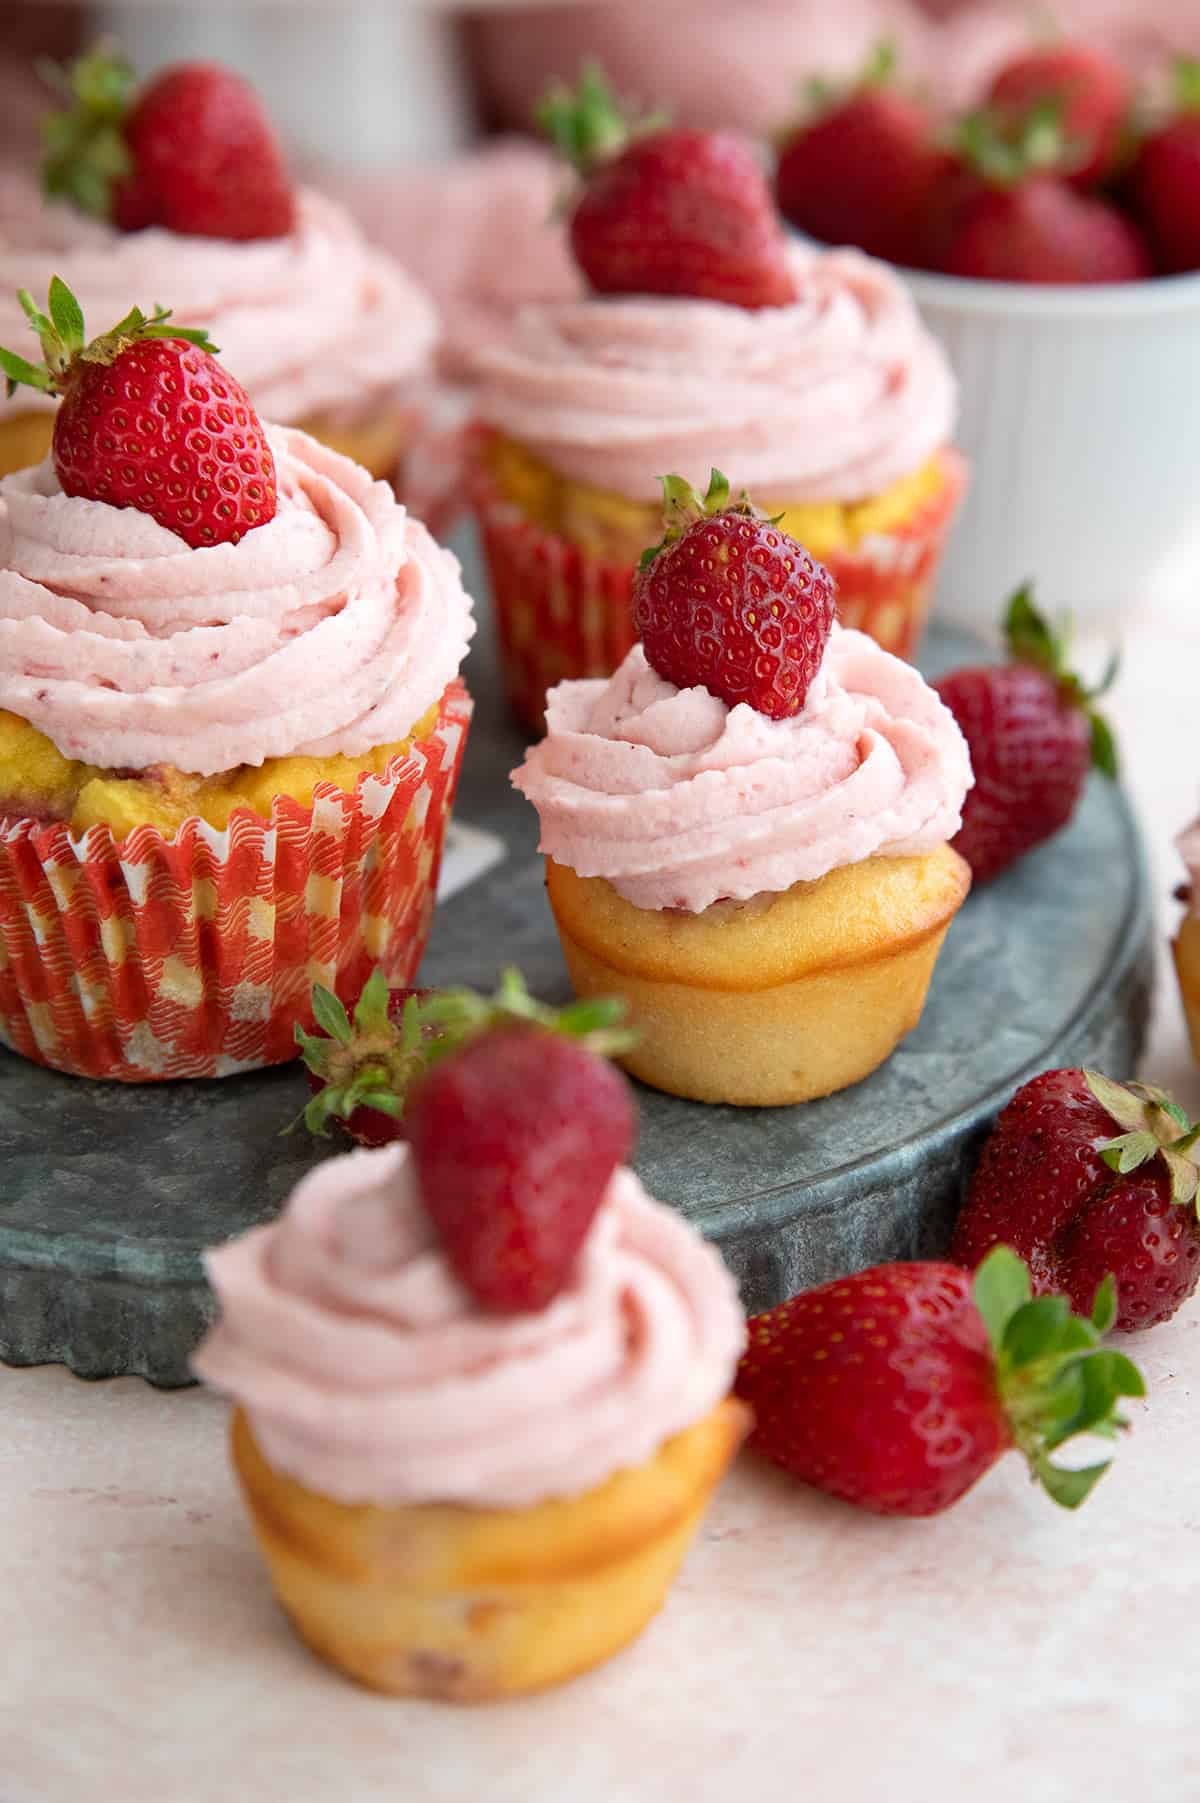 Keto Strawberry Cupcakes on a metal tray, with two mini cupcakes in front.